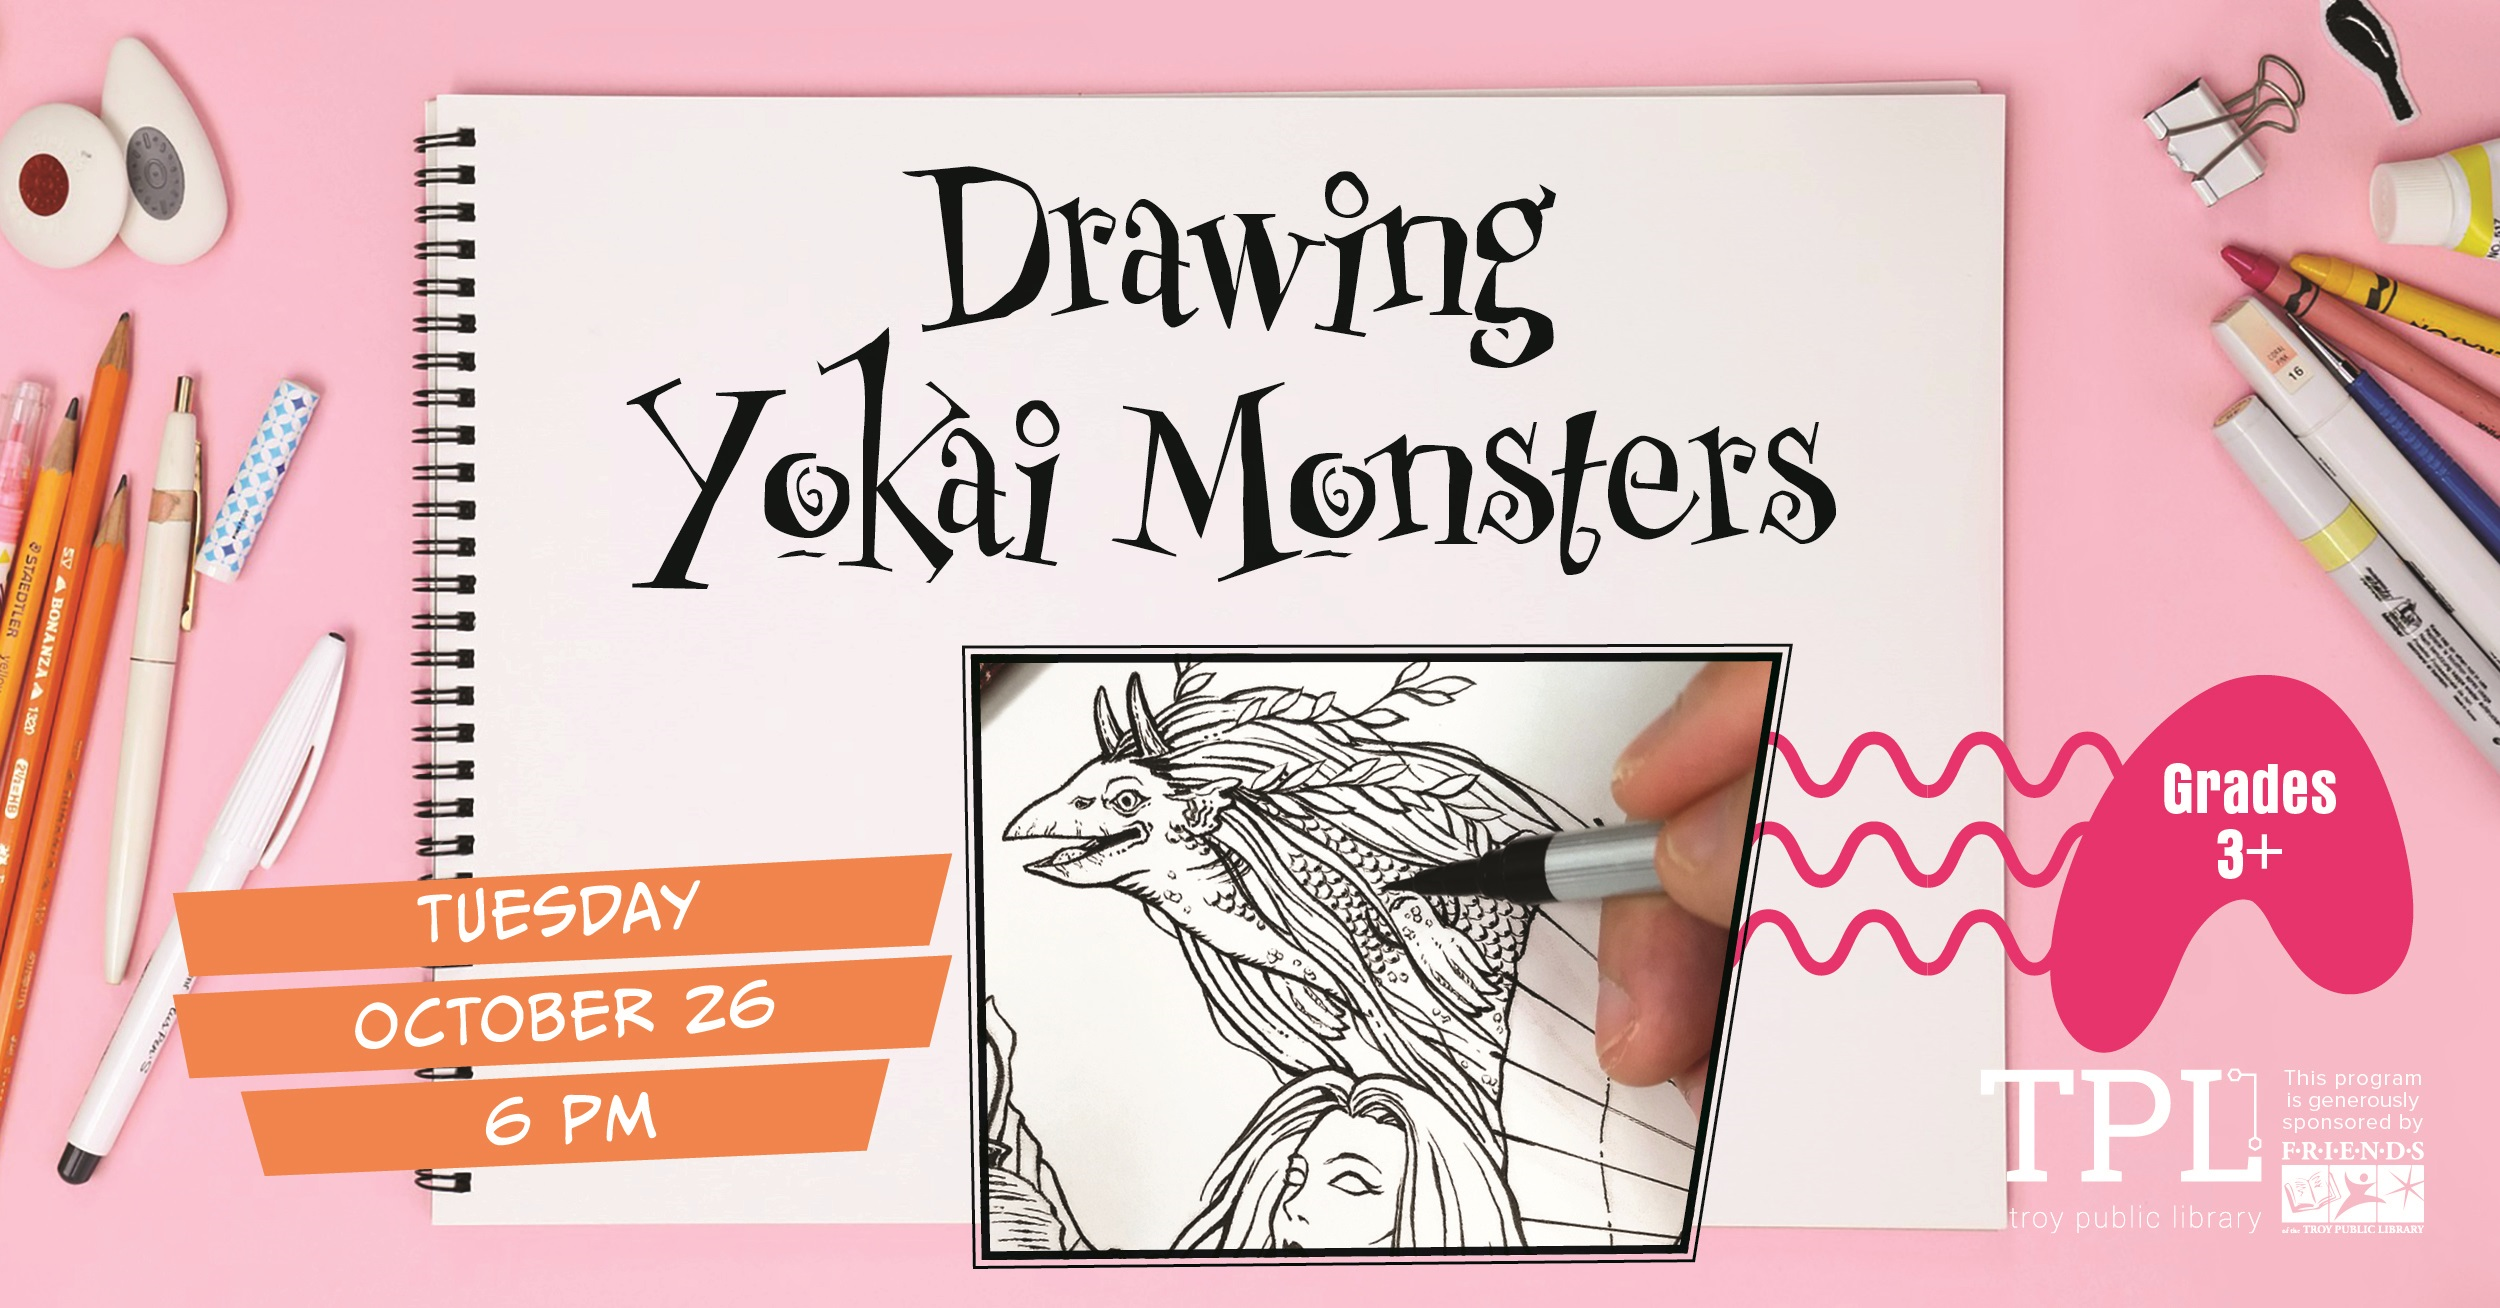 Drawing Yokai Monsters Tuesday, October 26 at 6pm For grades 3 and up. Sponsored by the Friends of the Troy Public Library.